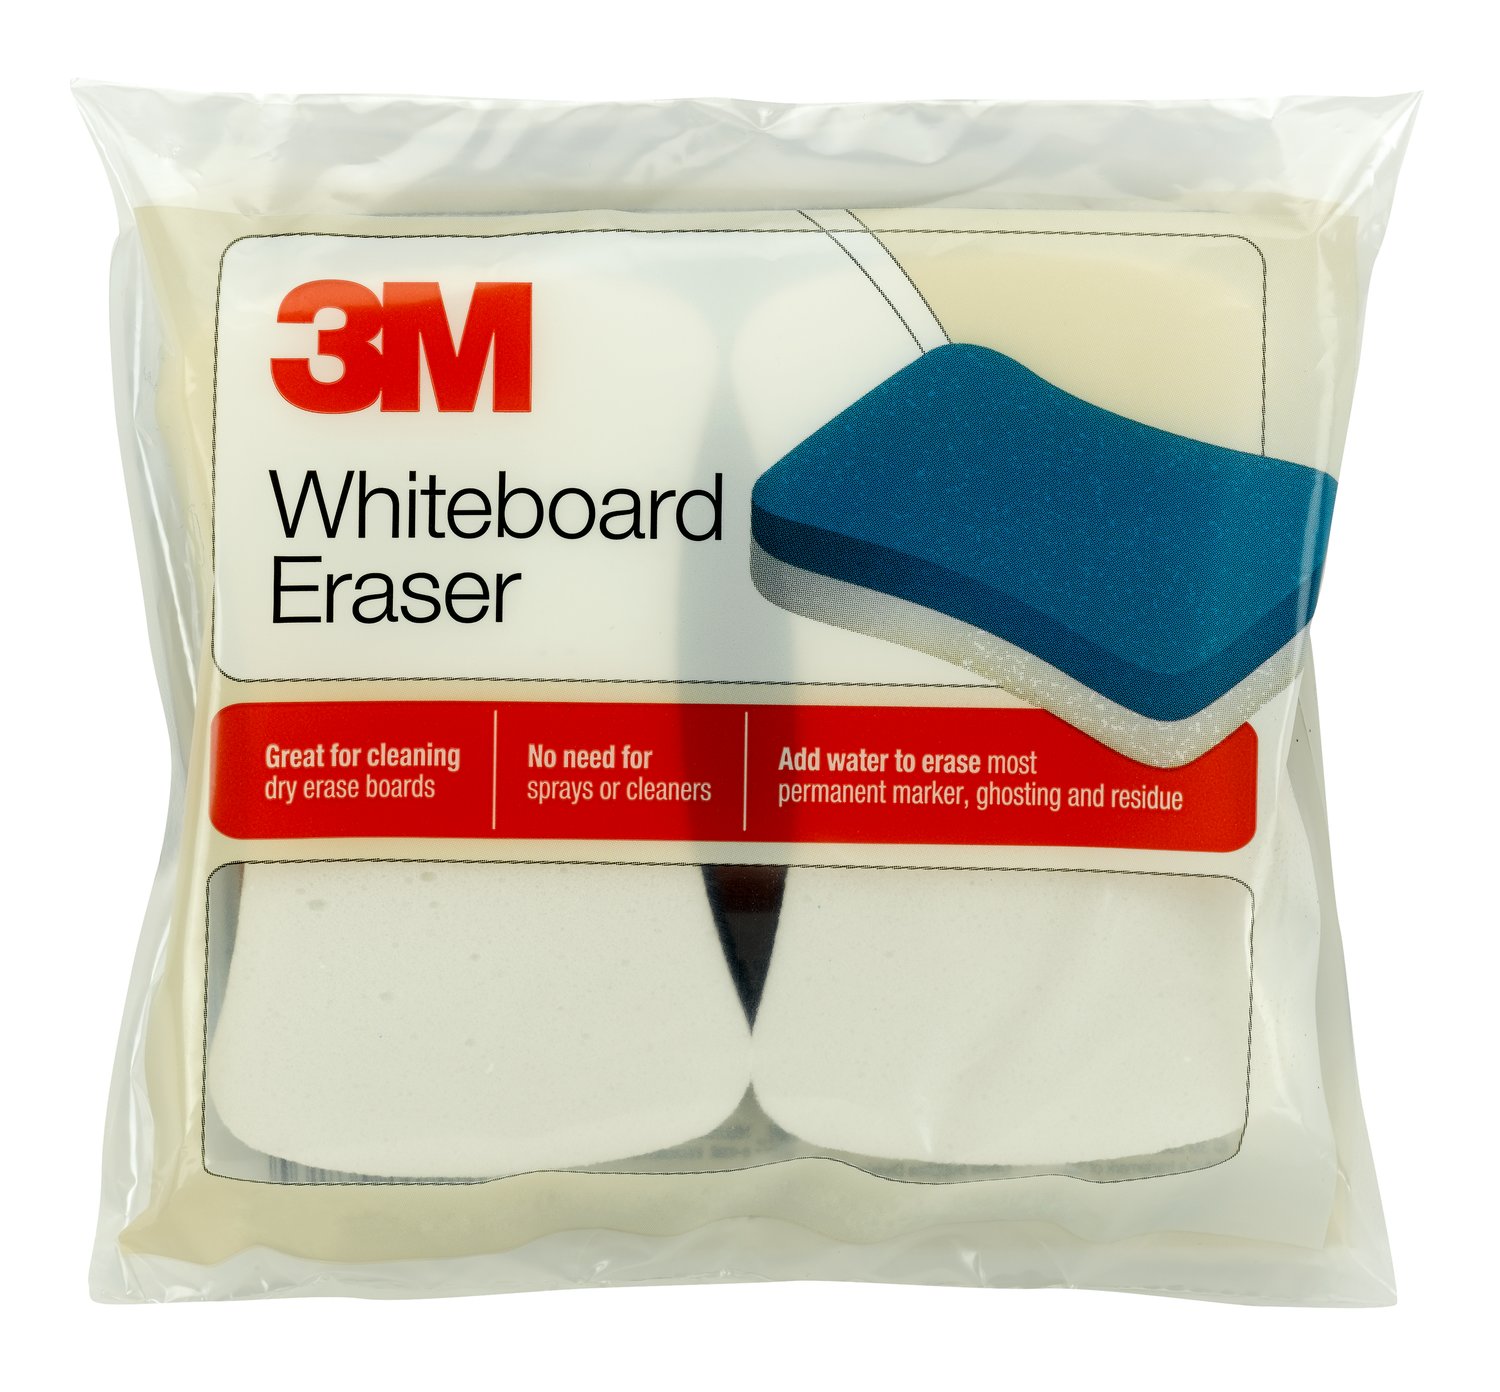 7000052505 - 3M Whiteboard Eraser 581-WBE for Permanent Markers and Whiteboards